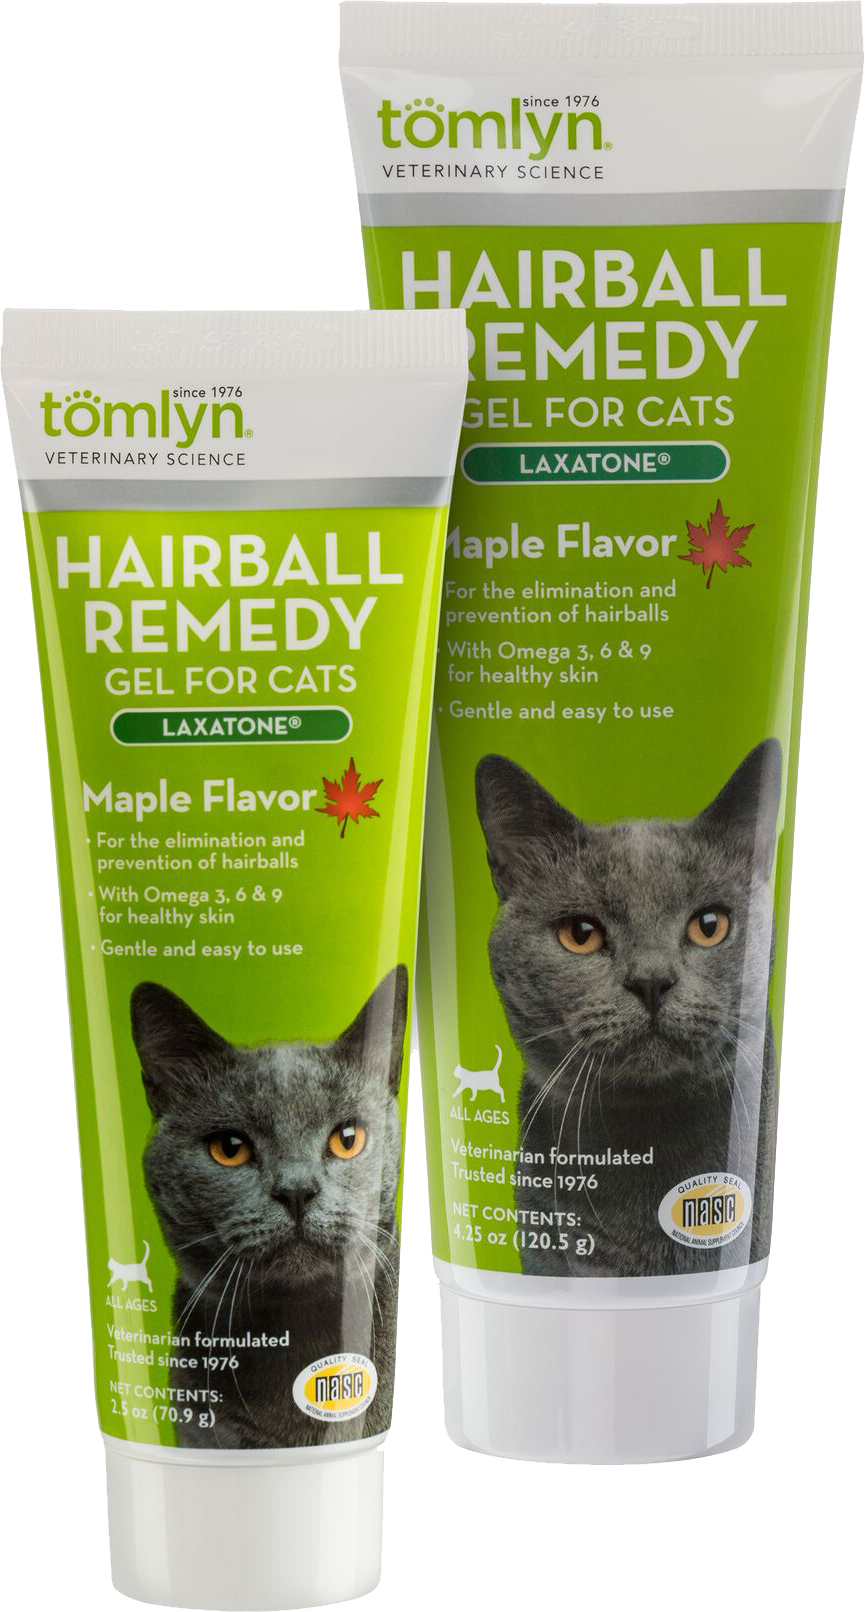 Tomlyn Laxatone Maple Flavour Hairball Remedy